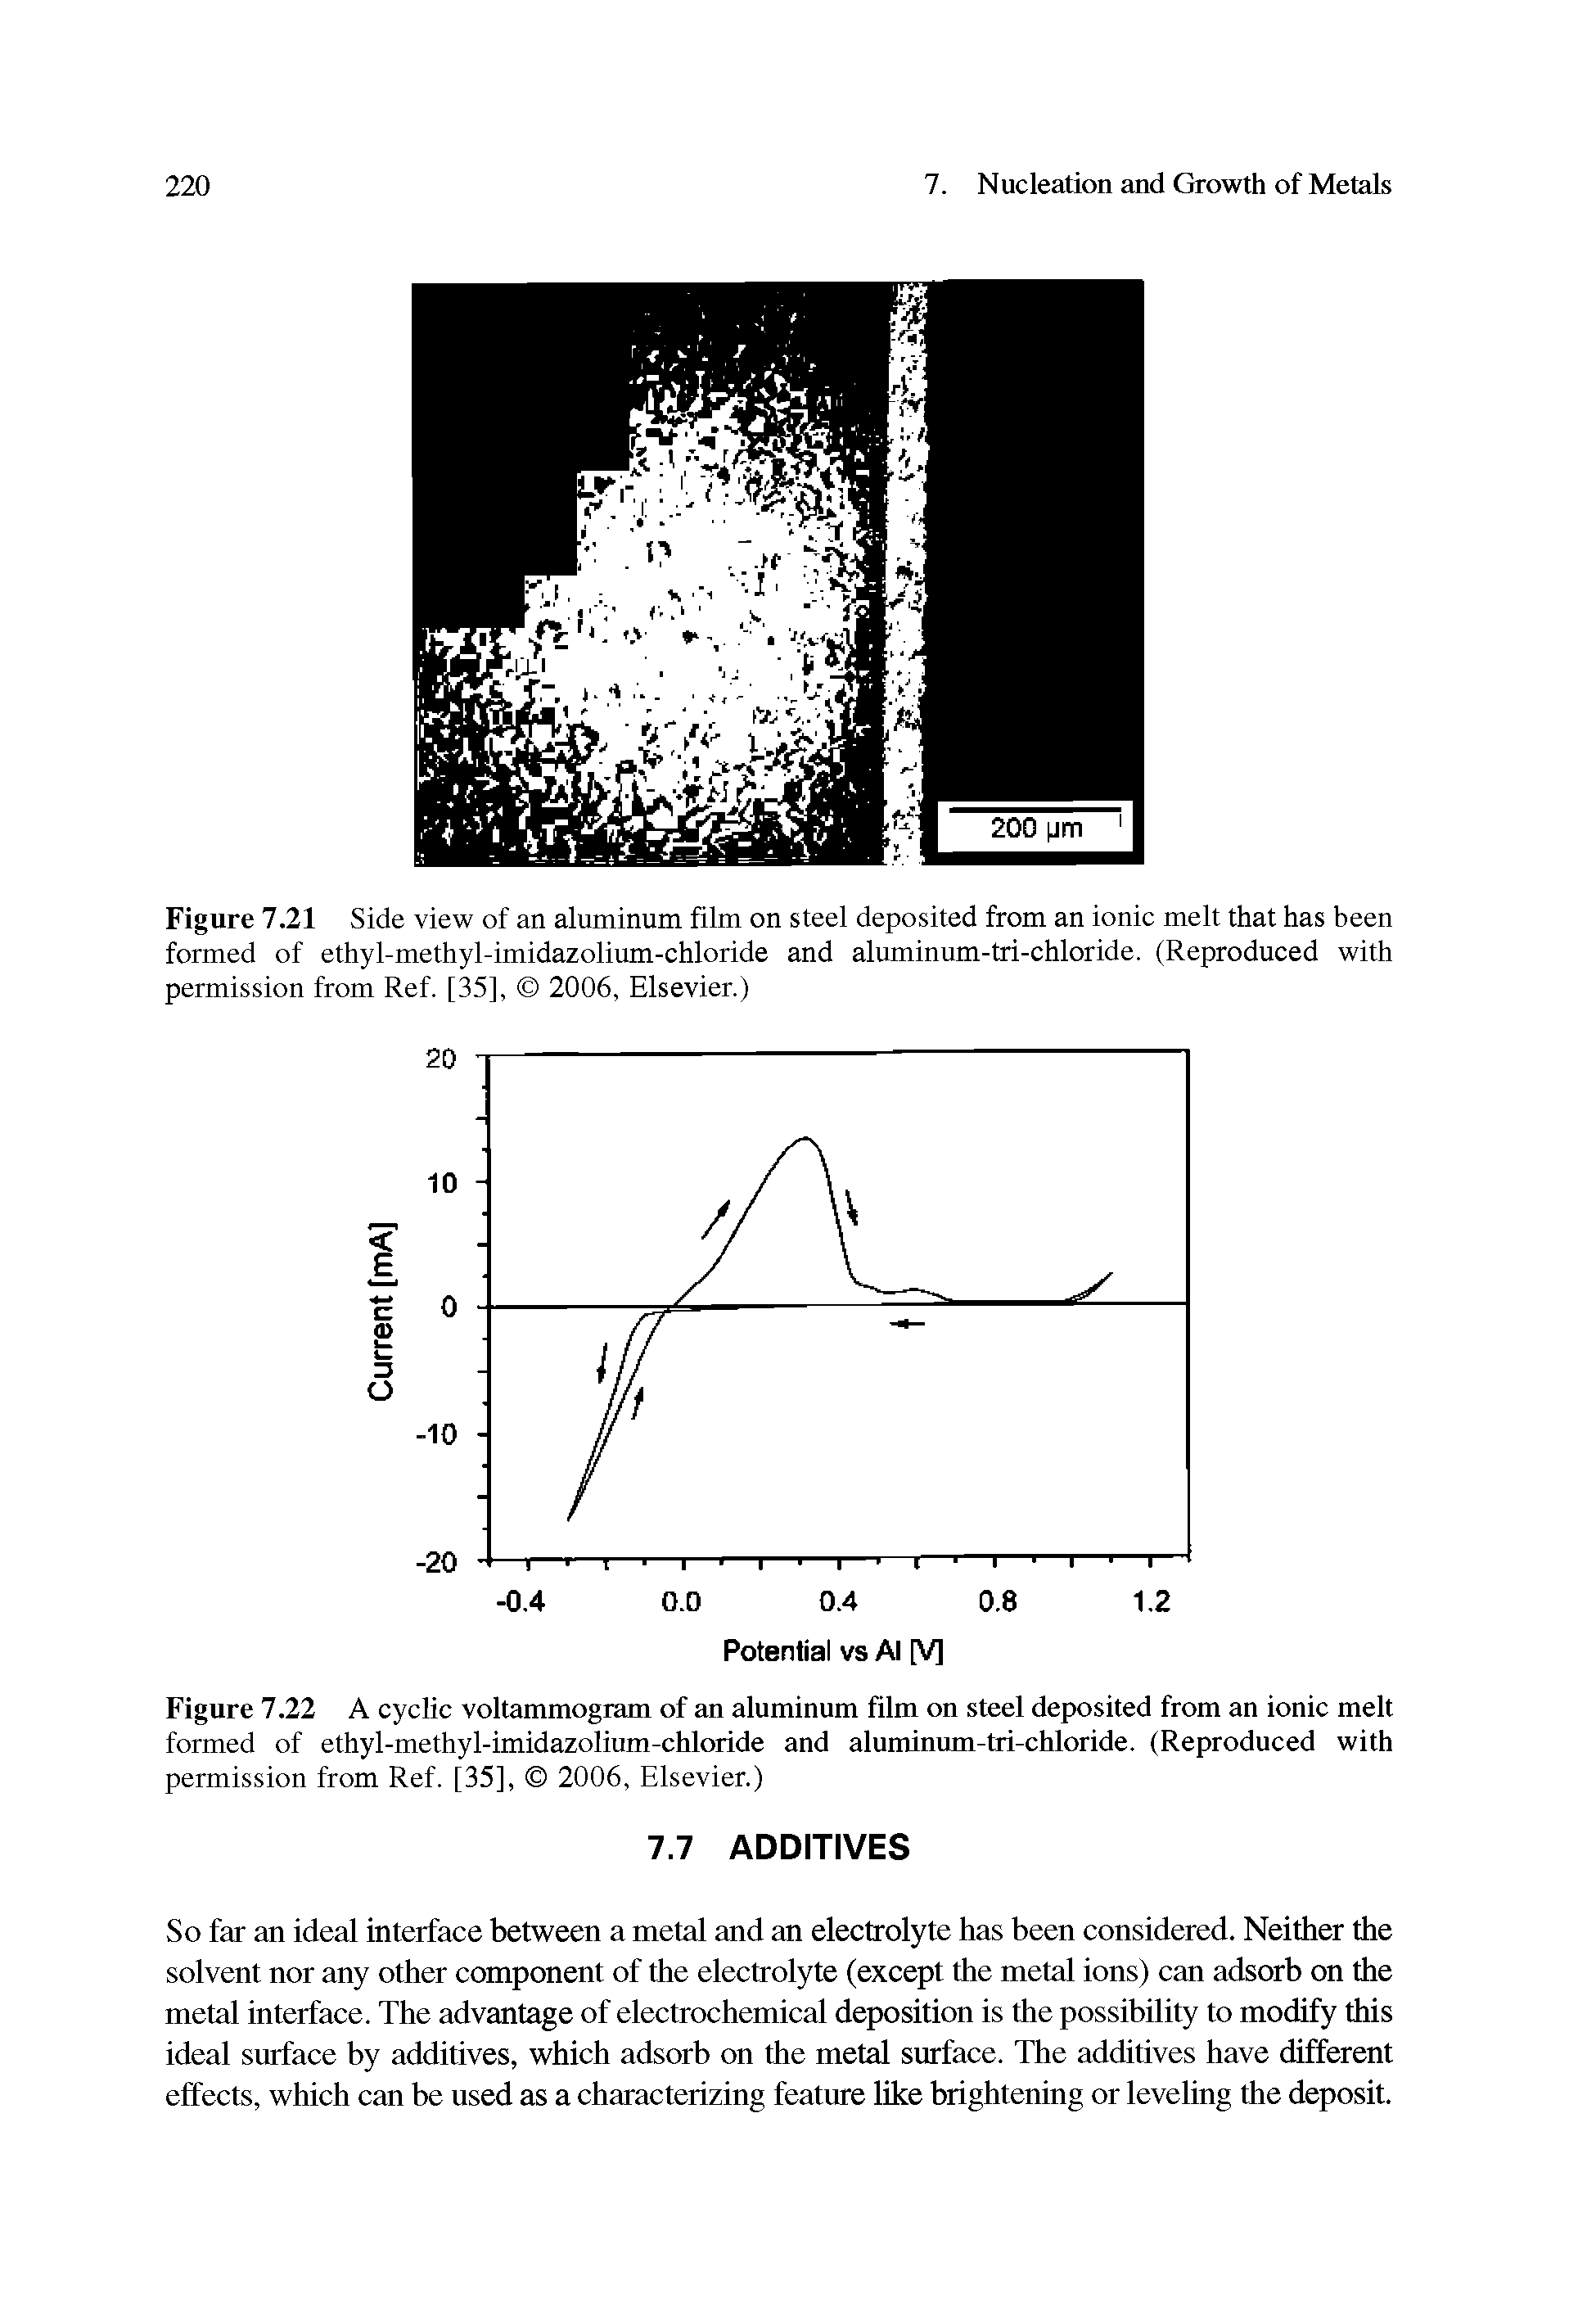 Figure 7.21 Side view of an aluminum film on steel deposited from an ionic melt that has been formed of ethyl-methyl-imidazolium-chloride and aluminum-tri-chloride. (Reproduced with permission from Ref. [35], 2006, Elsevier.)...